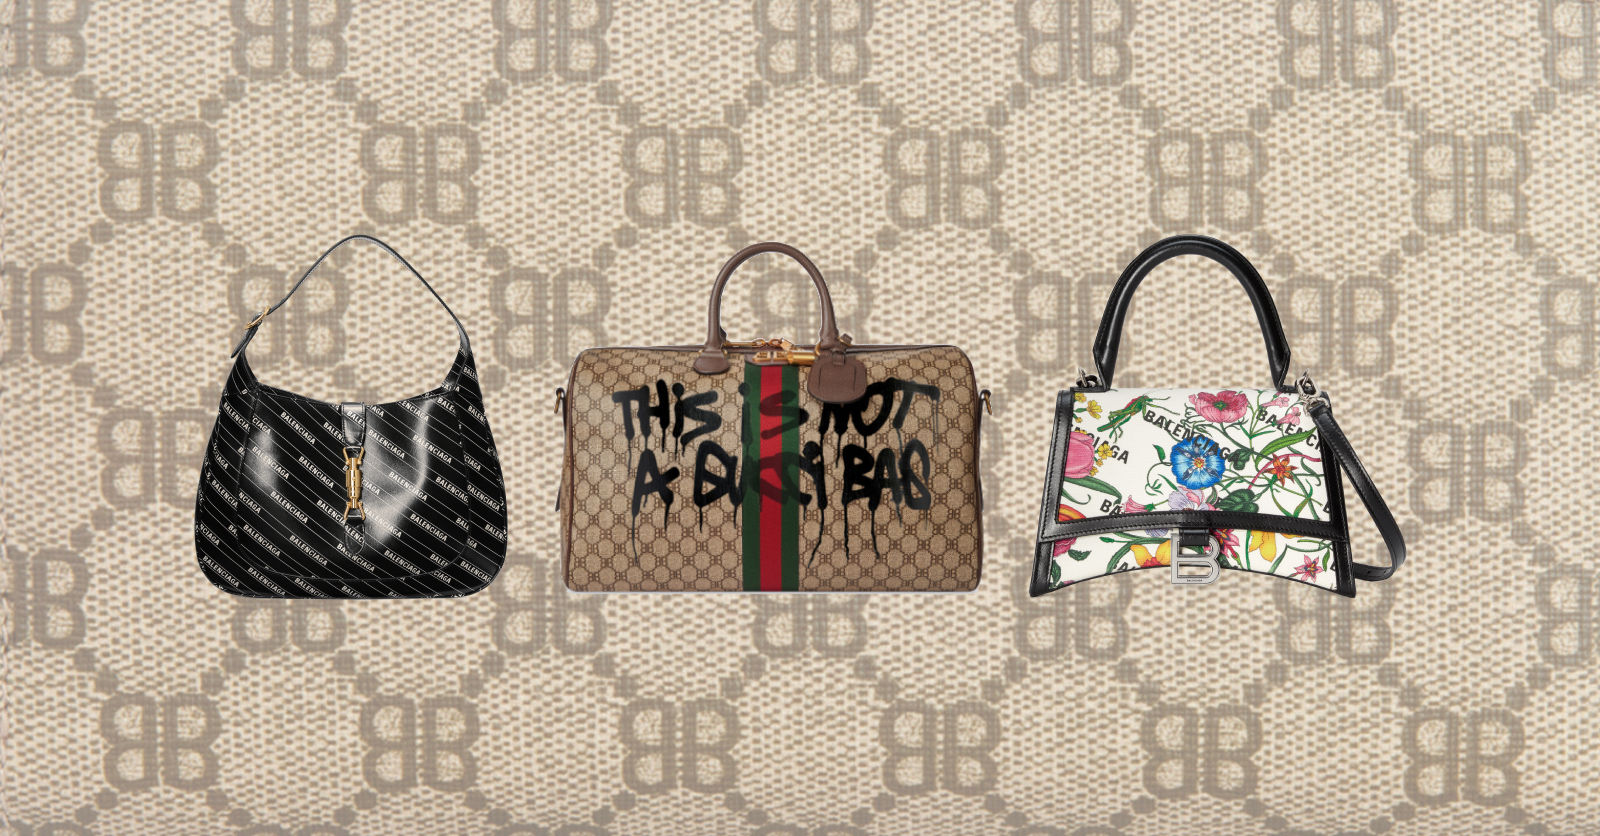 Gucci and Balenciaga release The Hacker Project in Singapore: see our top picks